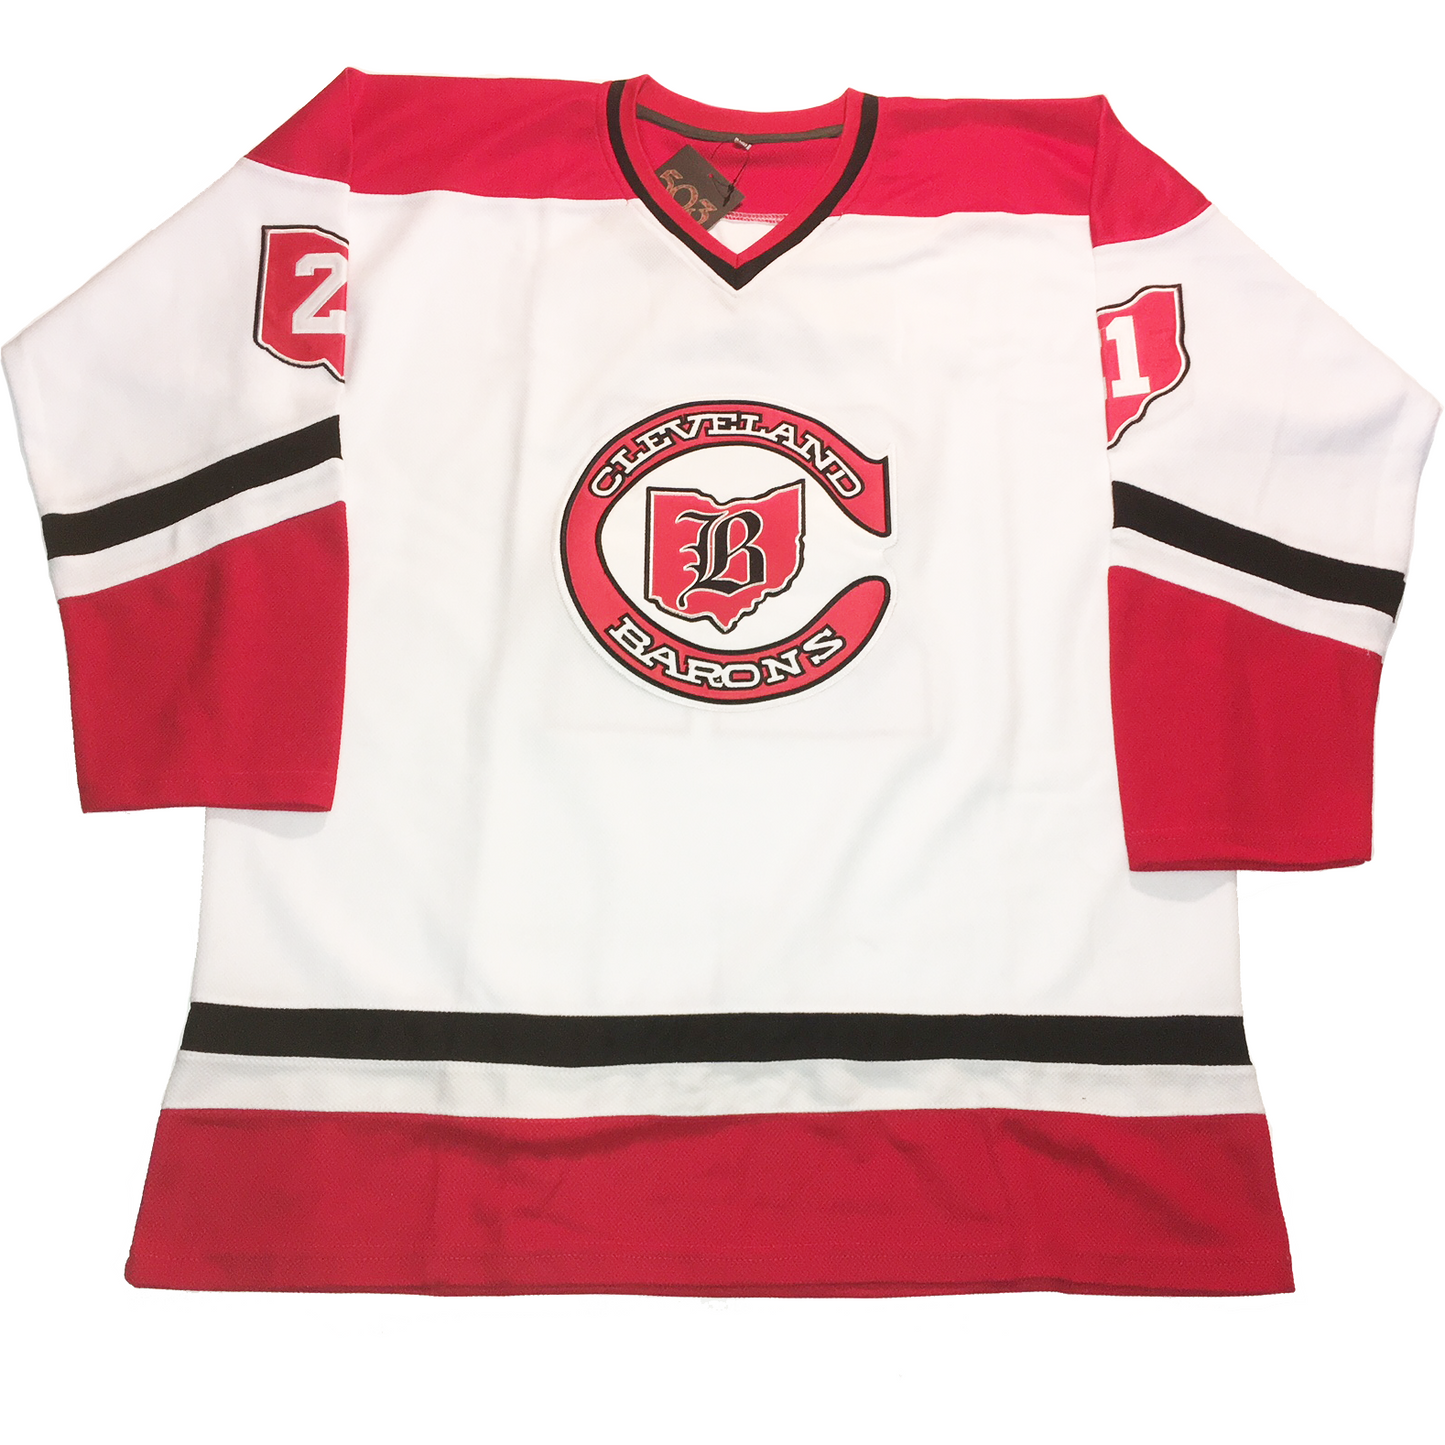 Cleve Barons Hockey Jersey Stitch Any name , Number Colors Free Shipping